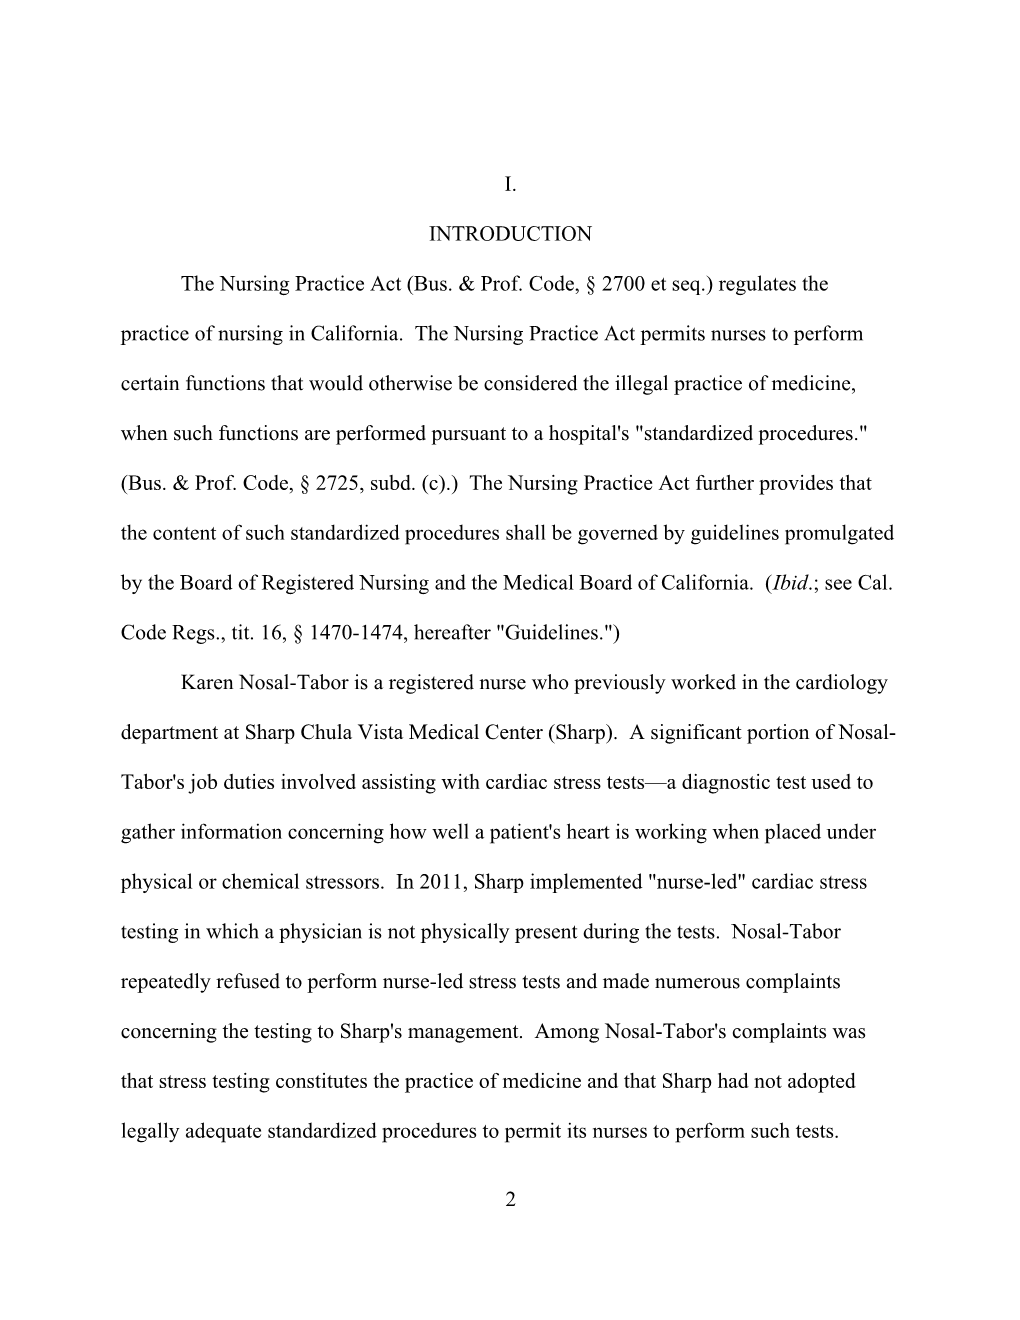 Filed 8/3/15; Pub. Order 8/27/15 (See End of Opn.)